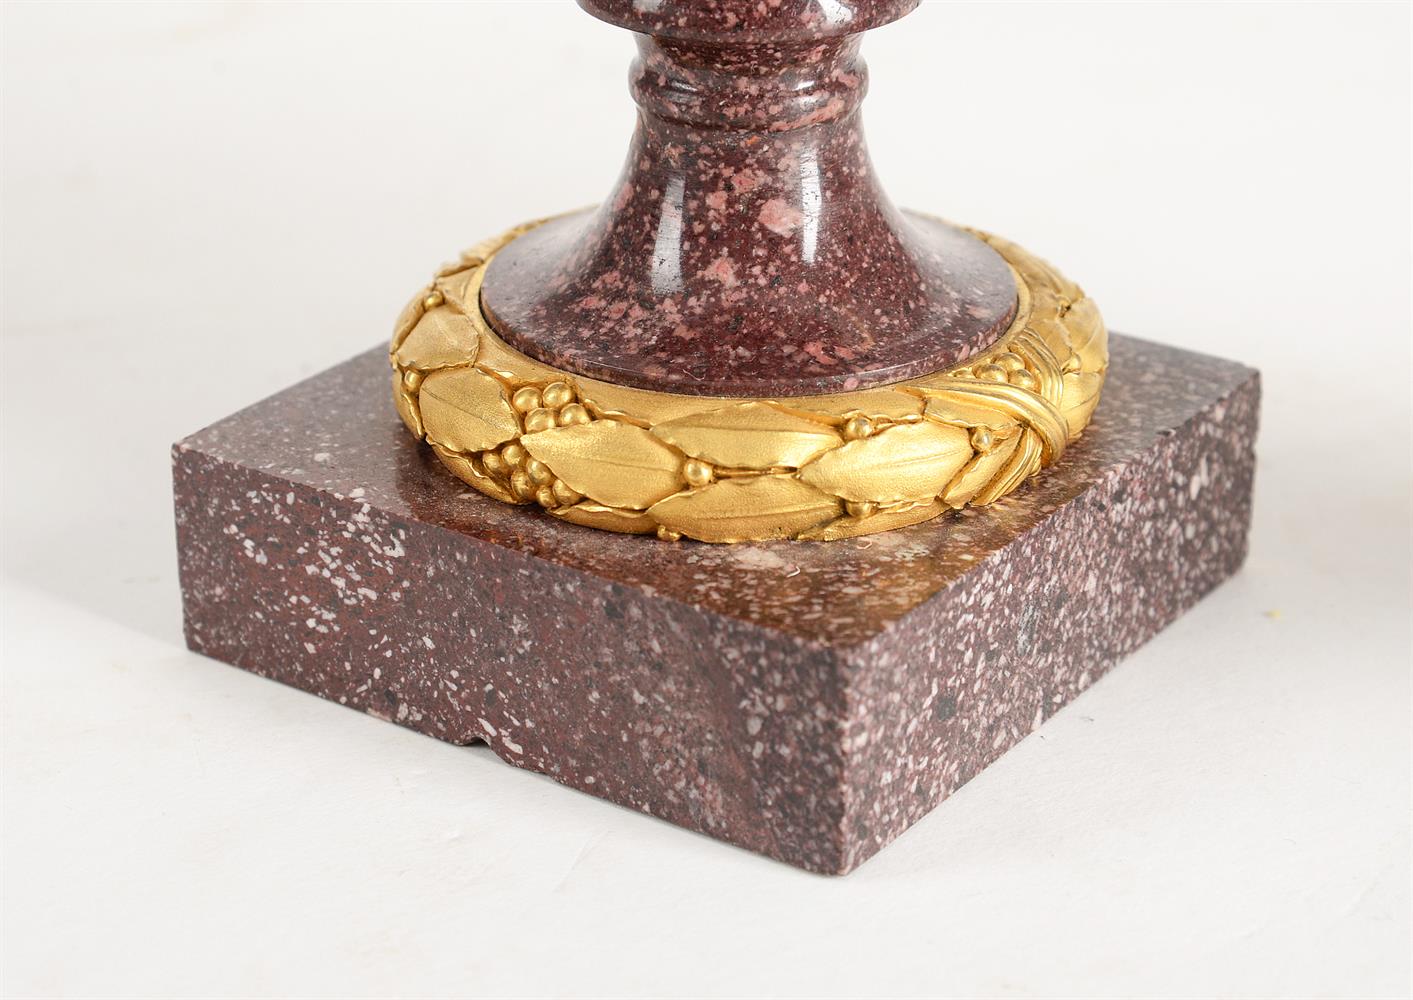 A PAIR OF FRENCH PORPHYRY AND ORMOLU MOUNTED LIDDED VASES, IN NEOCLASSICAL STYLE - Image 8 of 8